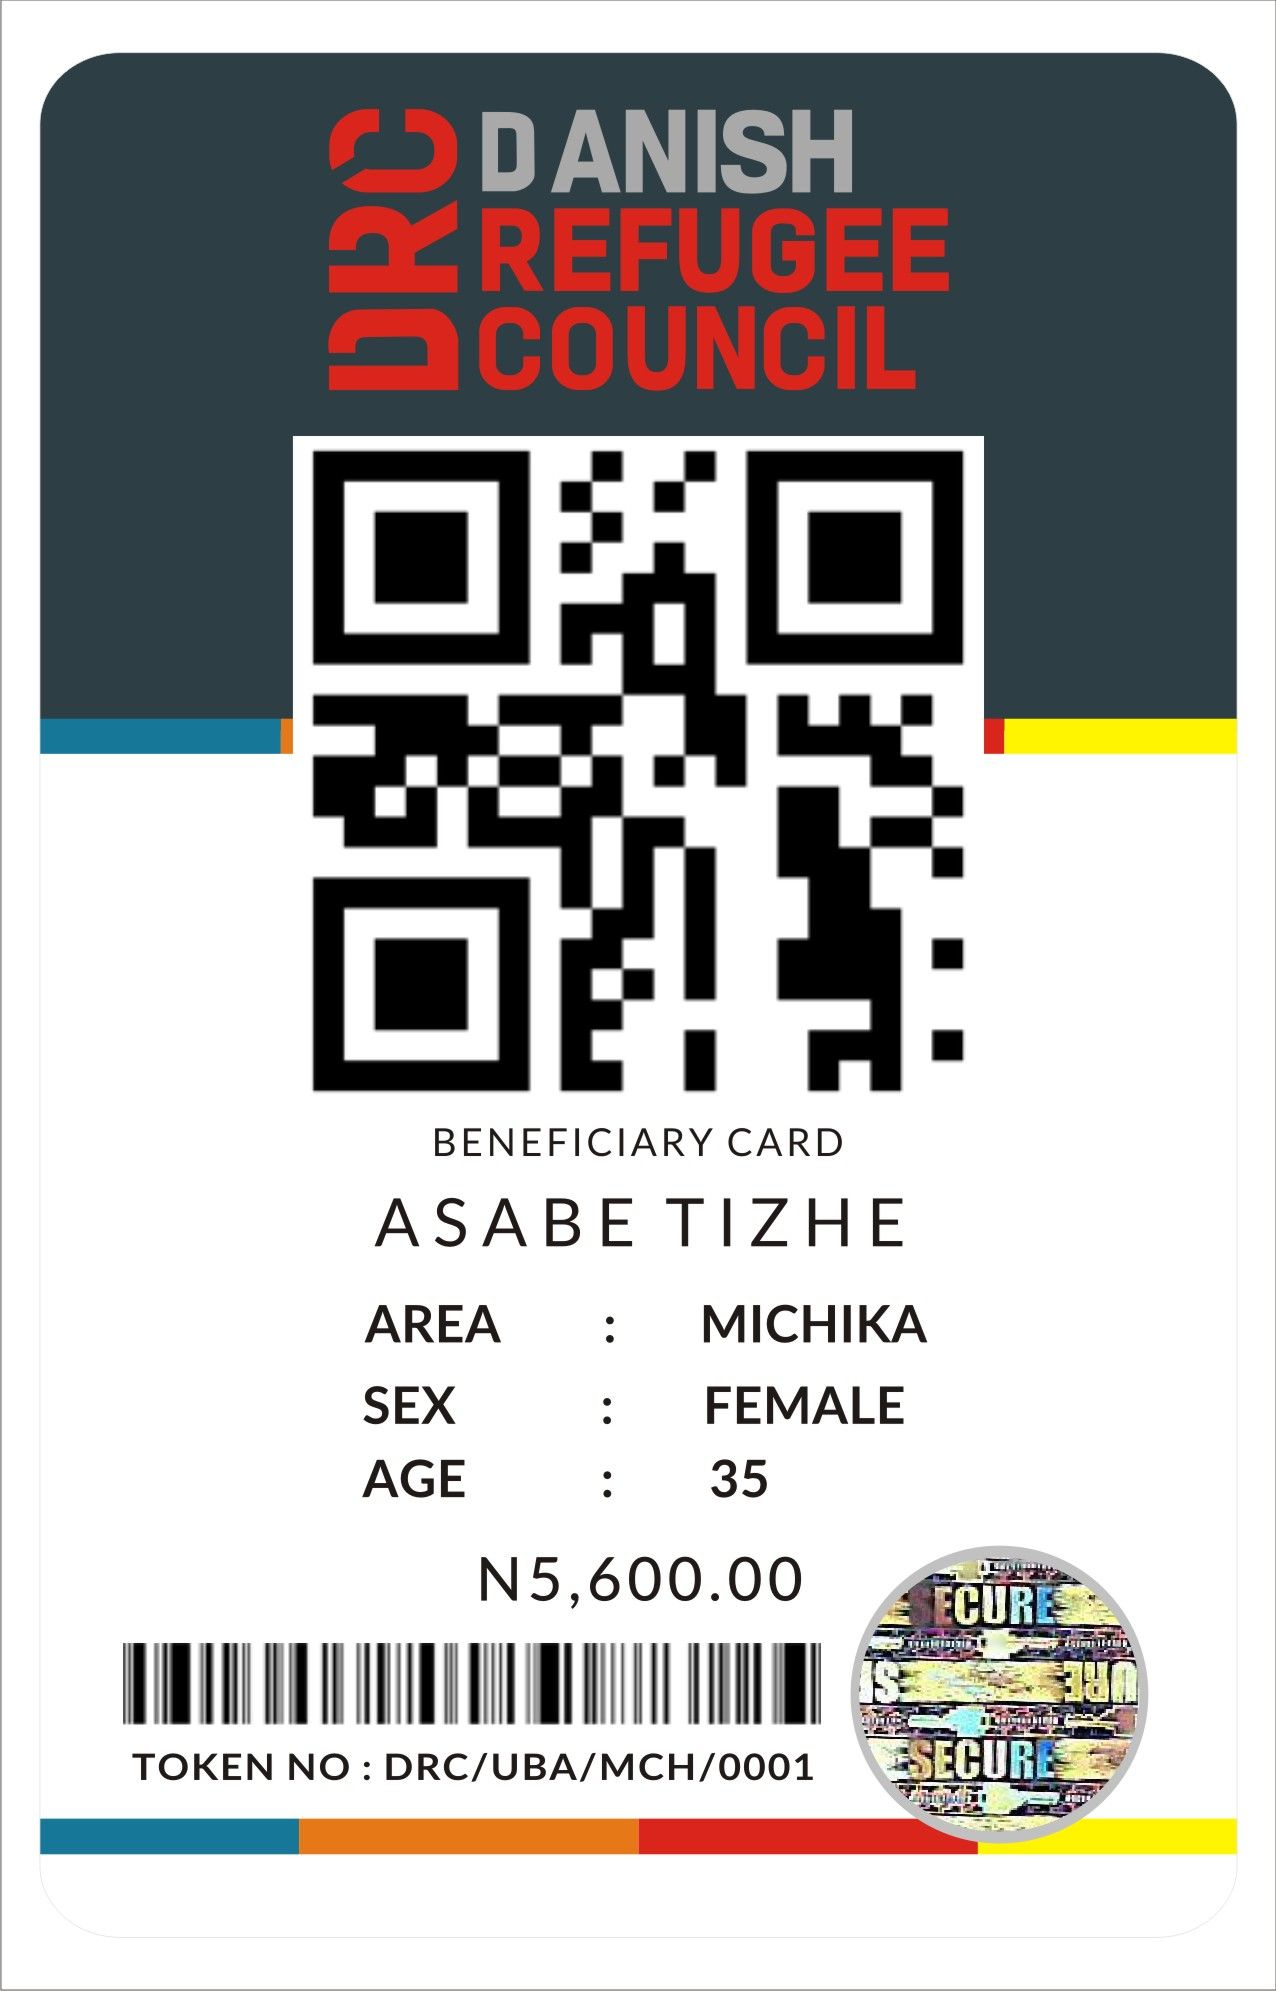 PRINT QR CODE, BARCODE AND AUTHENTICATION LABELS CALL EMMANUEL ON 08176499649